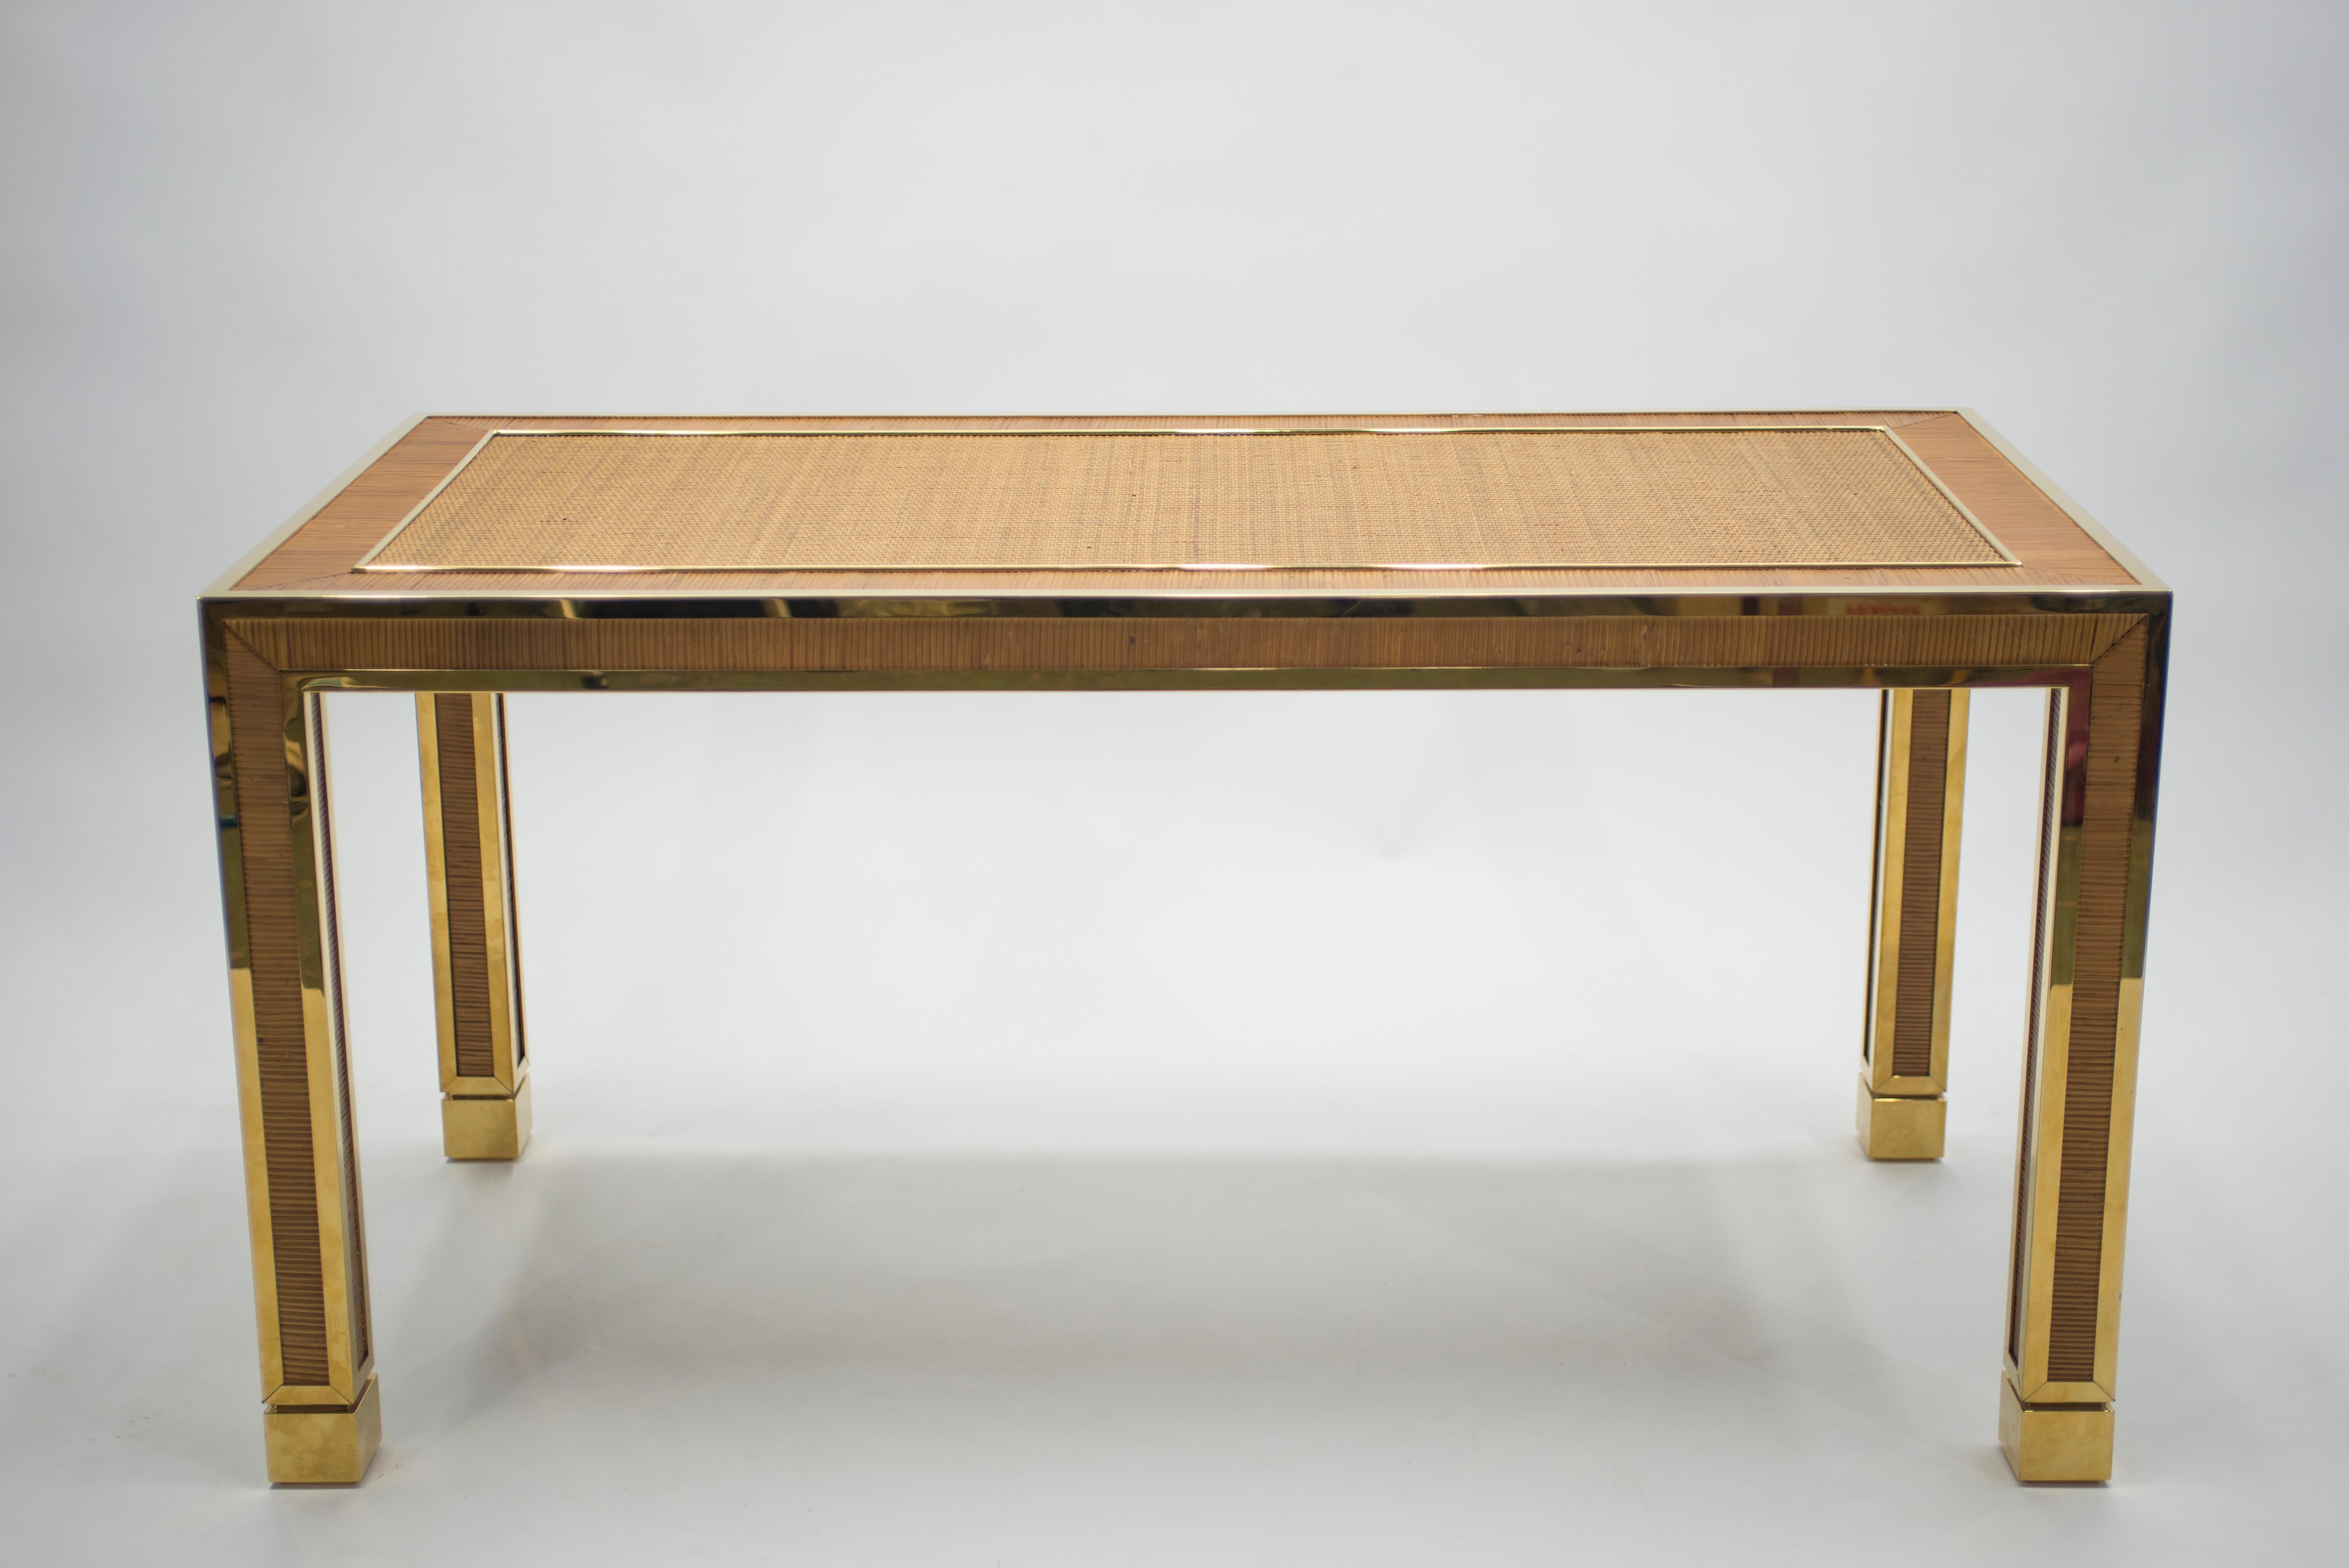 The designer of this small, light brown and golden dining table from the 1970s has managed to capture a warm and invigorating style. The structure of this piece is crafted from bamboo, lending it a natural texture and look. Gleaming brass accents